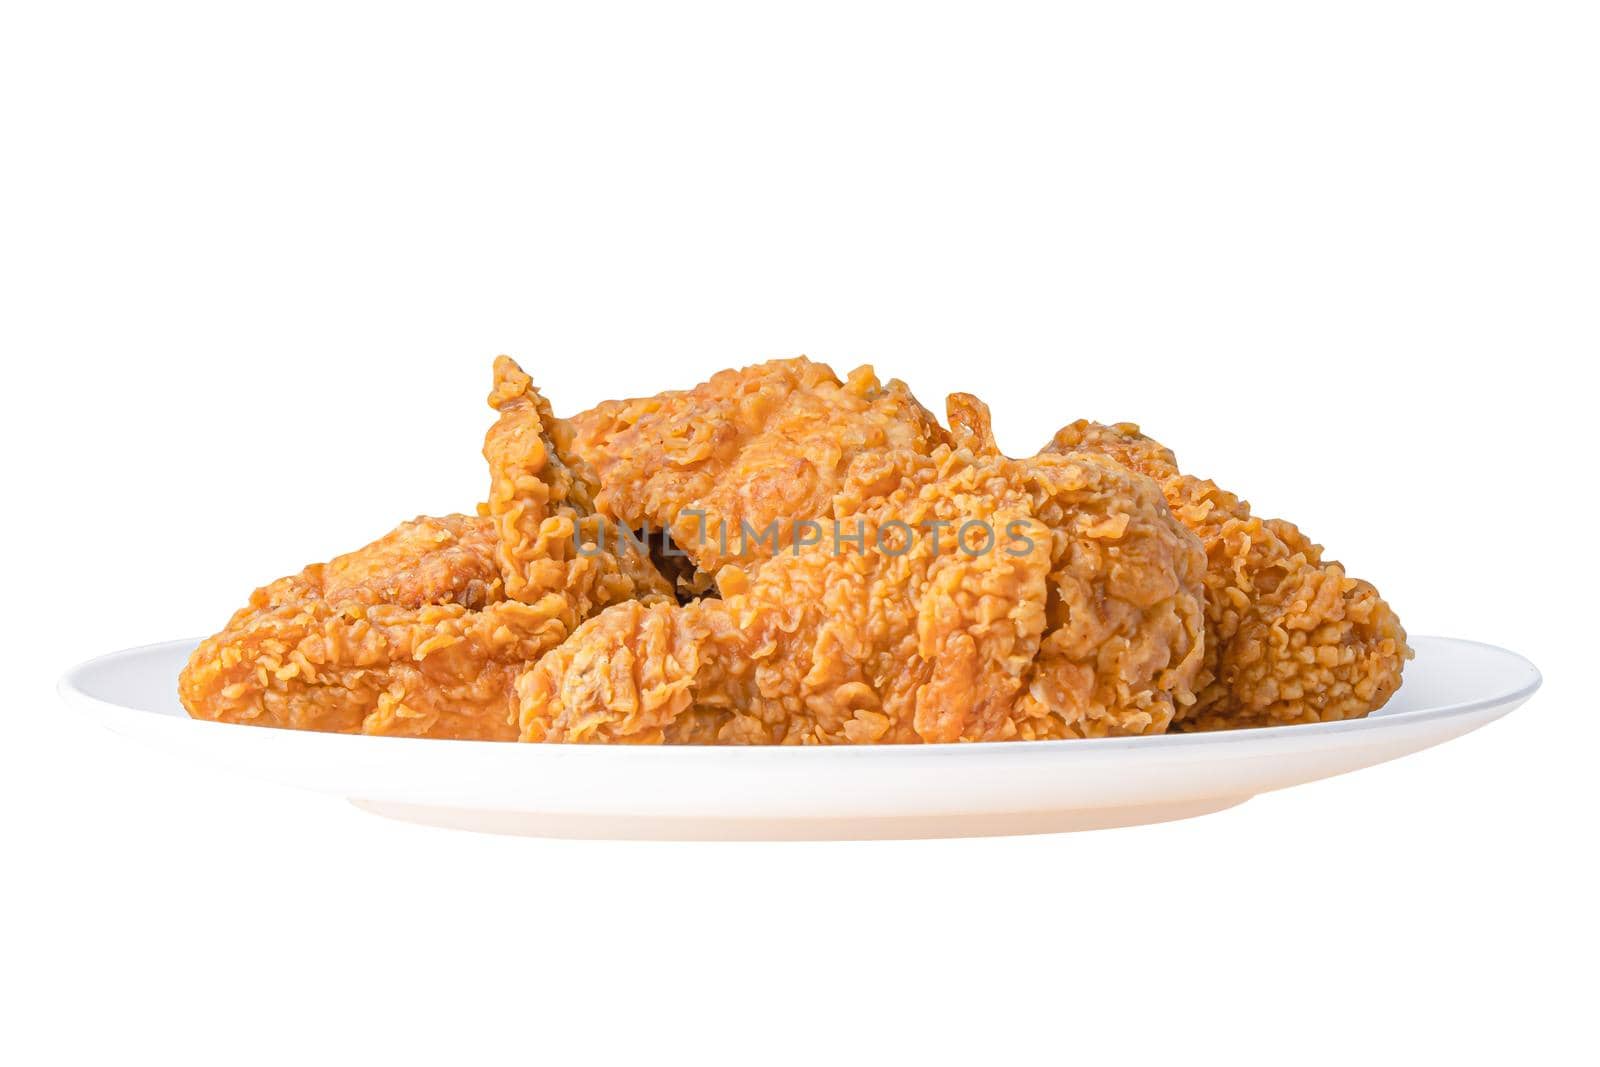 Fried chicken fast food on white dish isolated on white background. by pamai